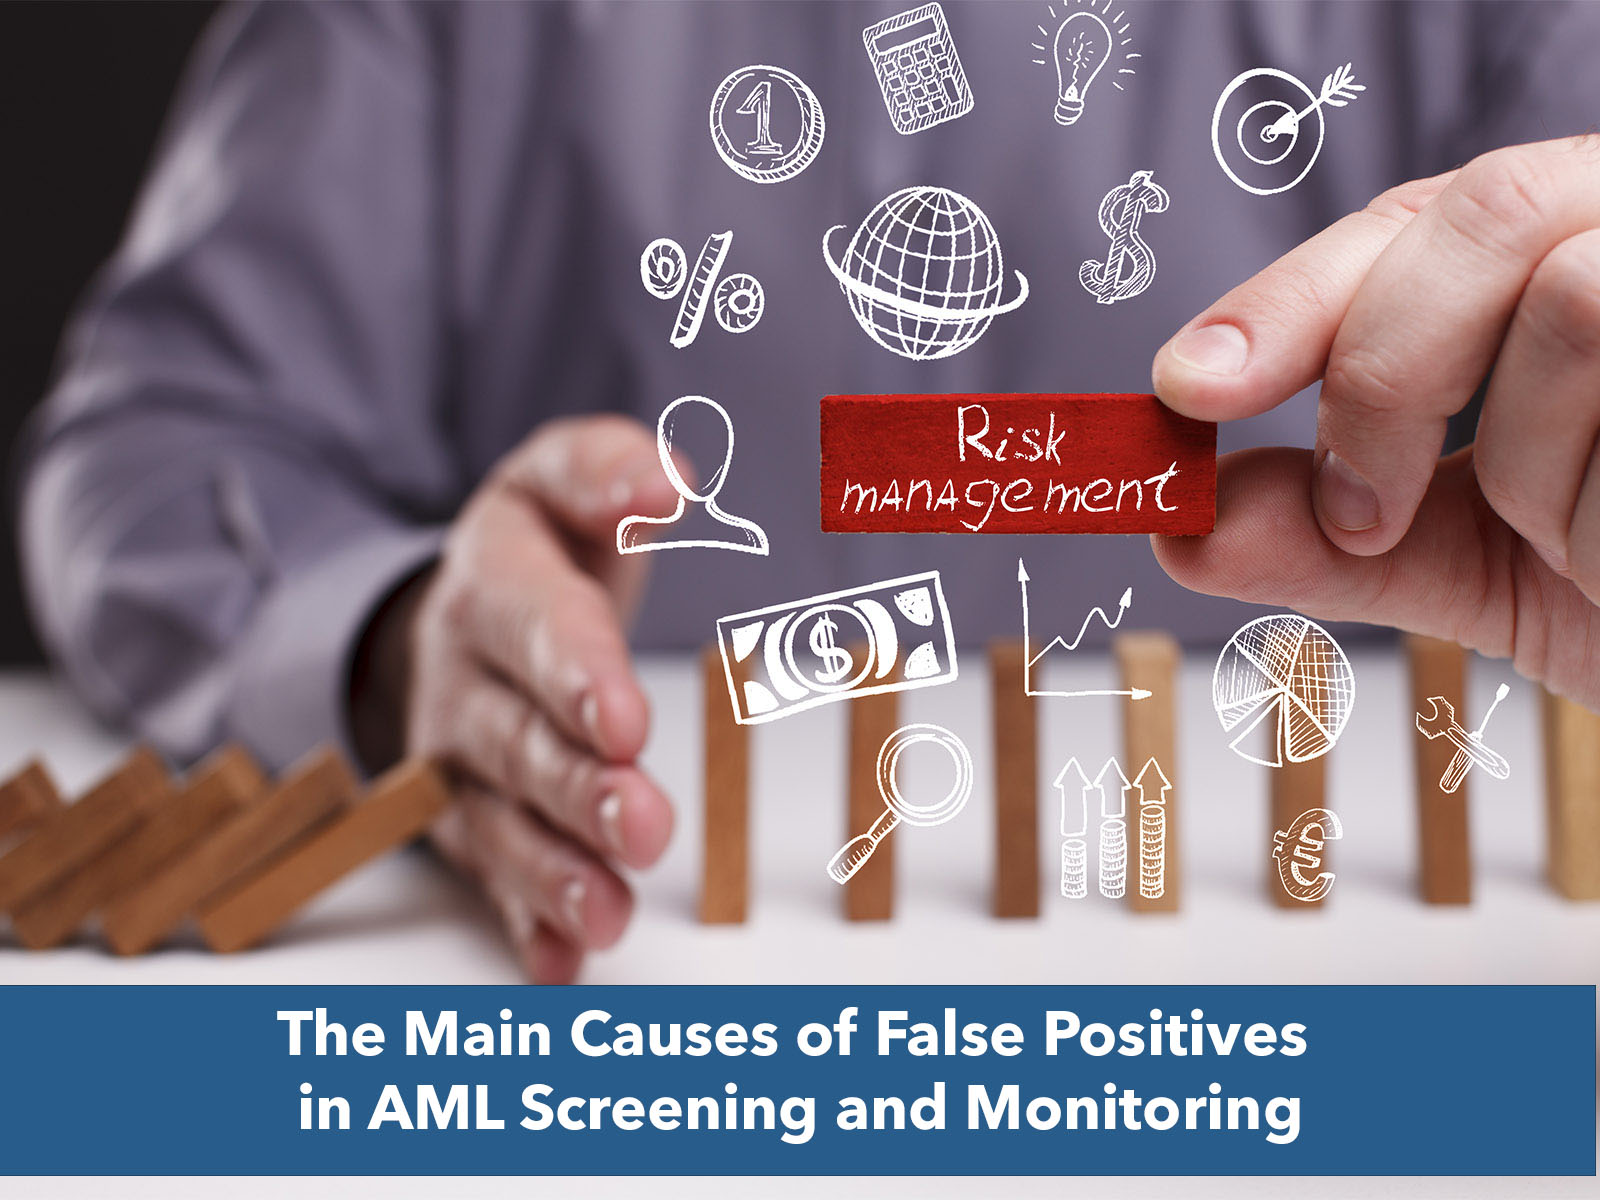 This is a photo illustration showing a hand holding a "Risk Management" domino. There are Risk-related icons hovering around the red domino. This illustrates Risk Management for false positives in AML Compliance.